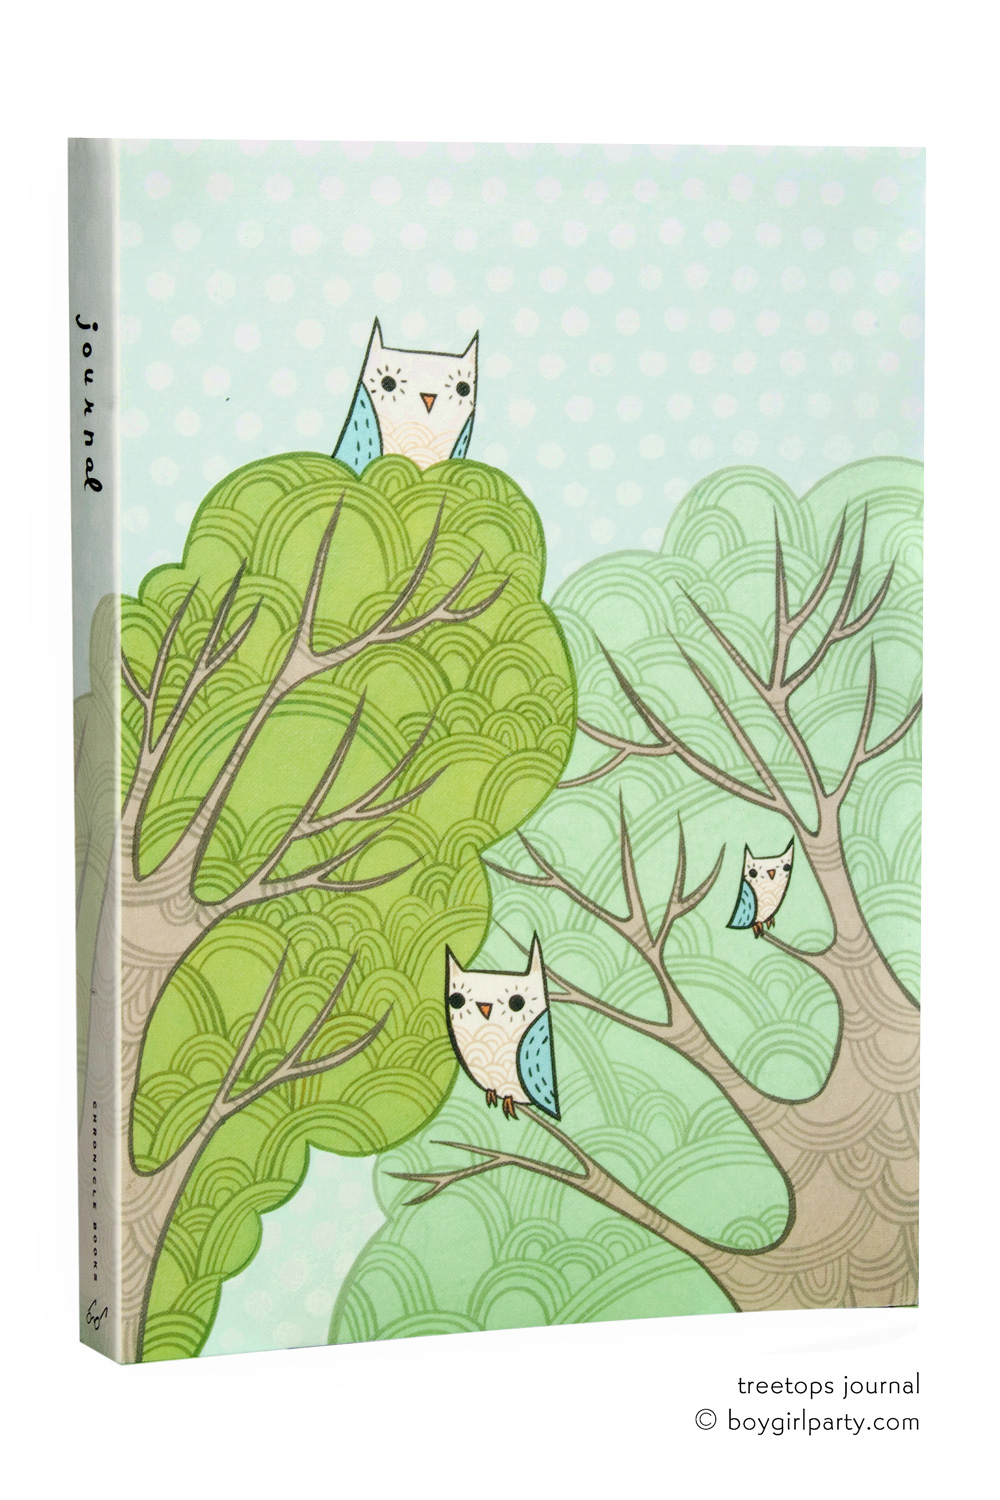 Treetops Journal published by Chronicle Books by Susie Ghahremani / boygirlparty.com